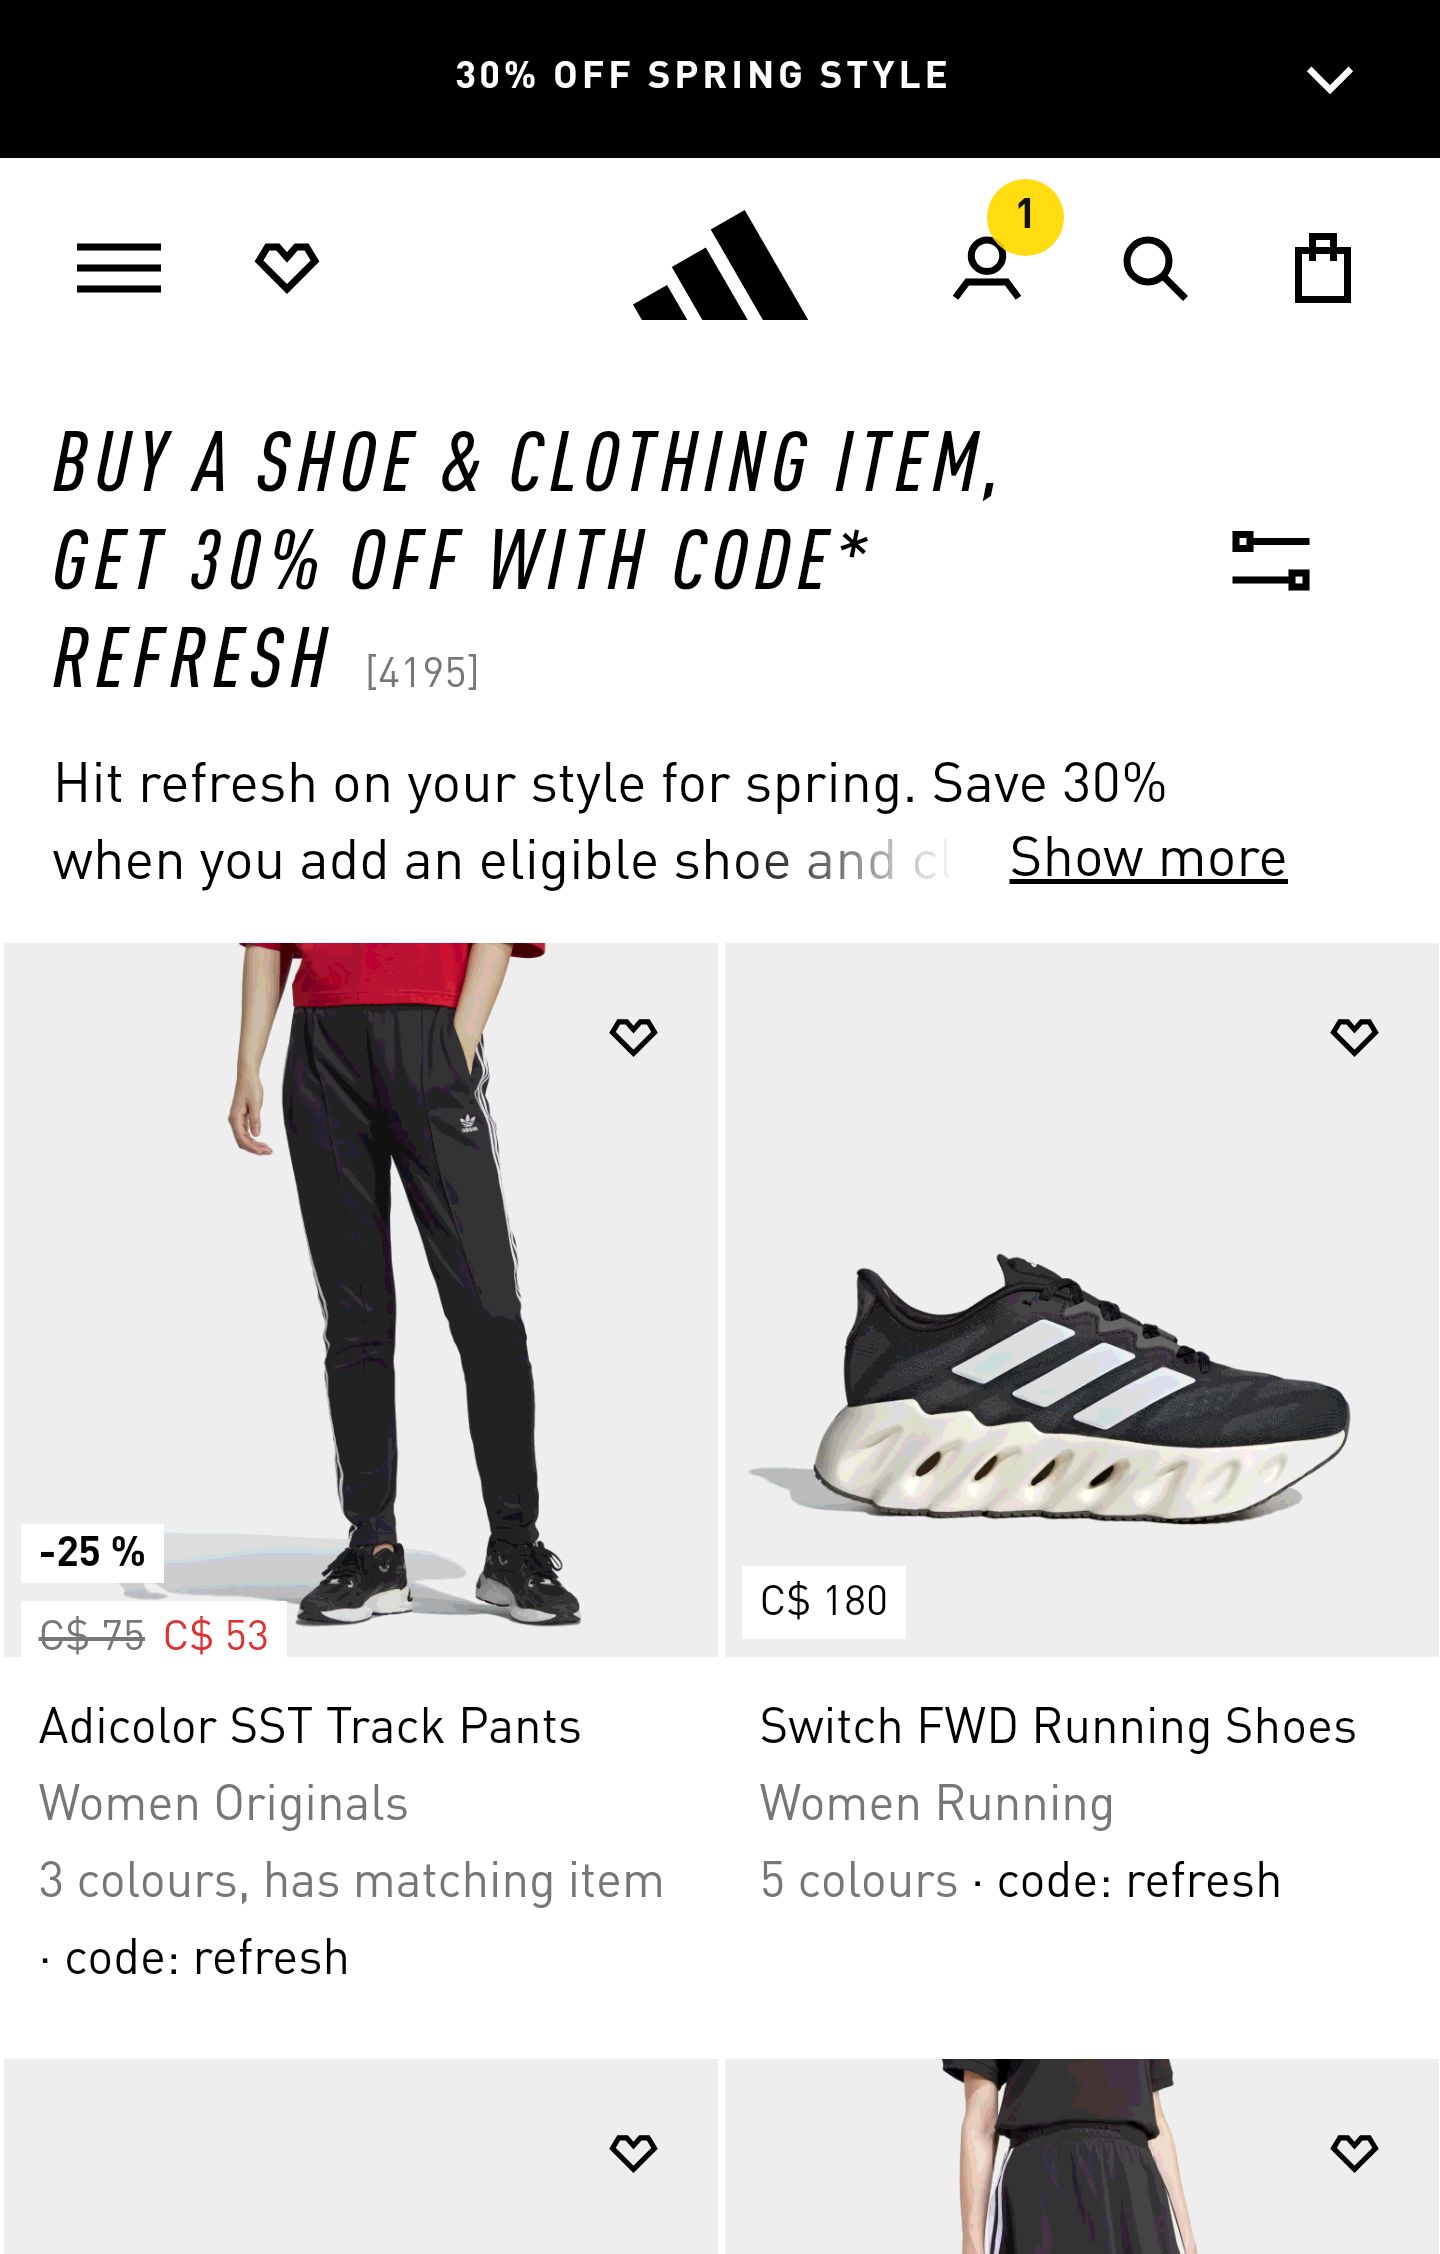 Buy a Shoe & Clothing Item, Get 30% Off